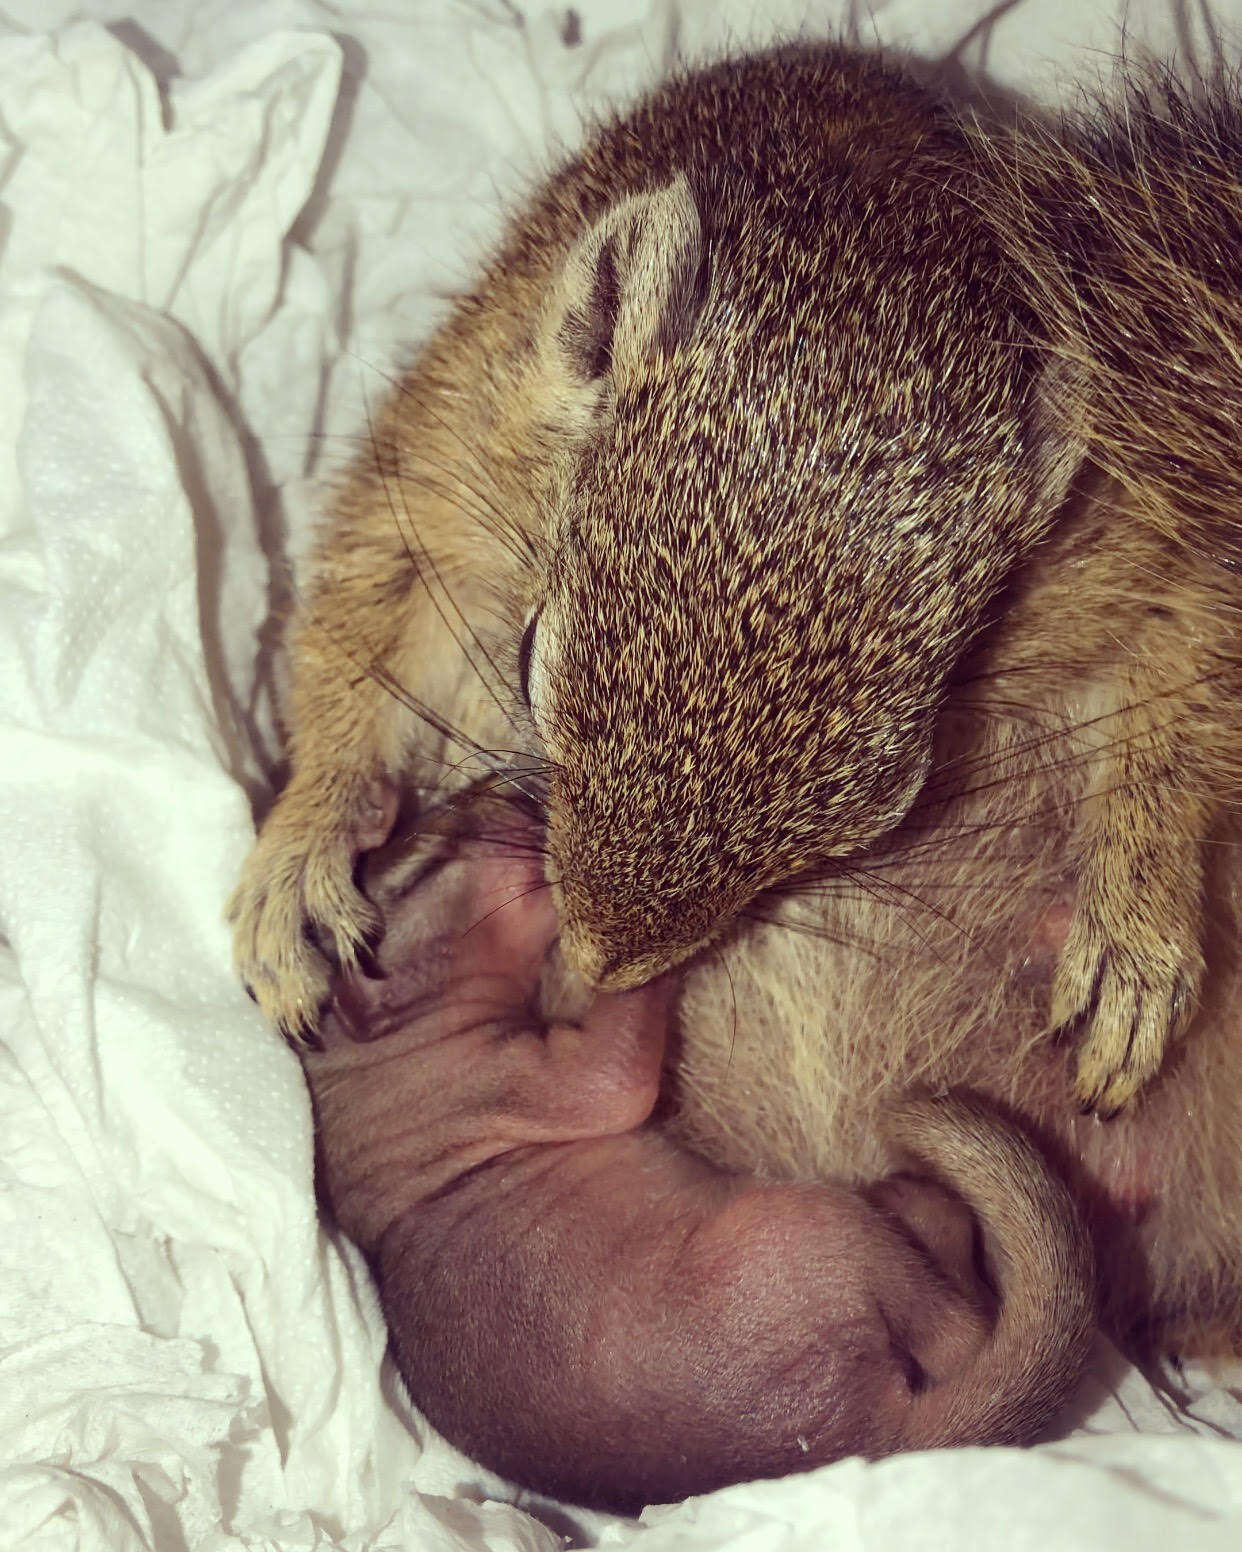 Pregnant rescue squirrel has her baby